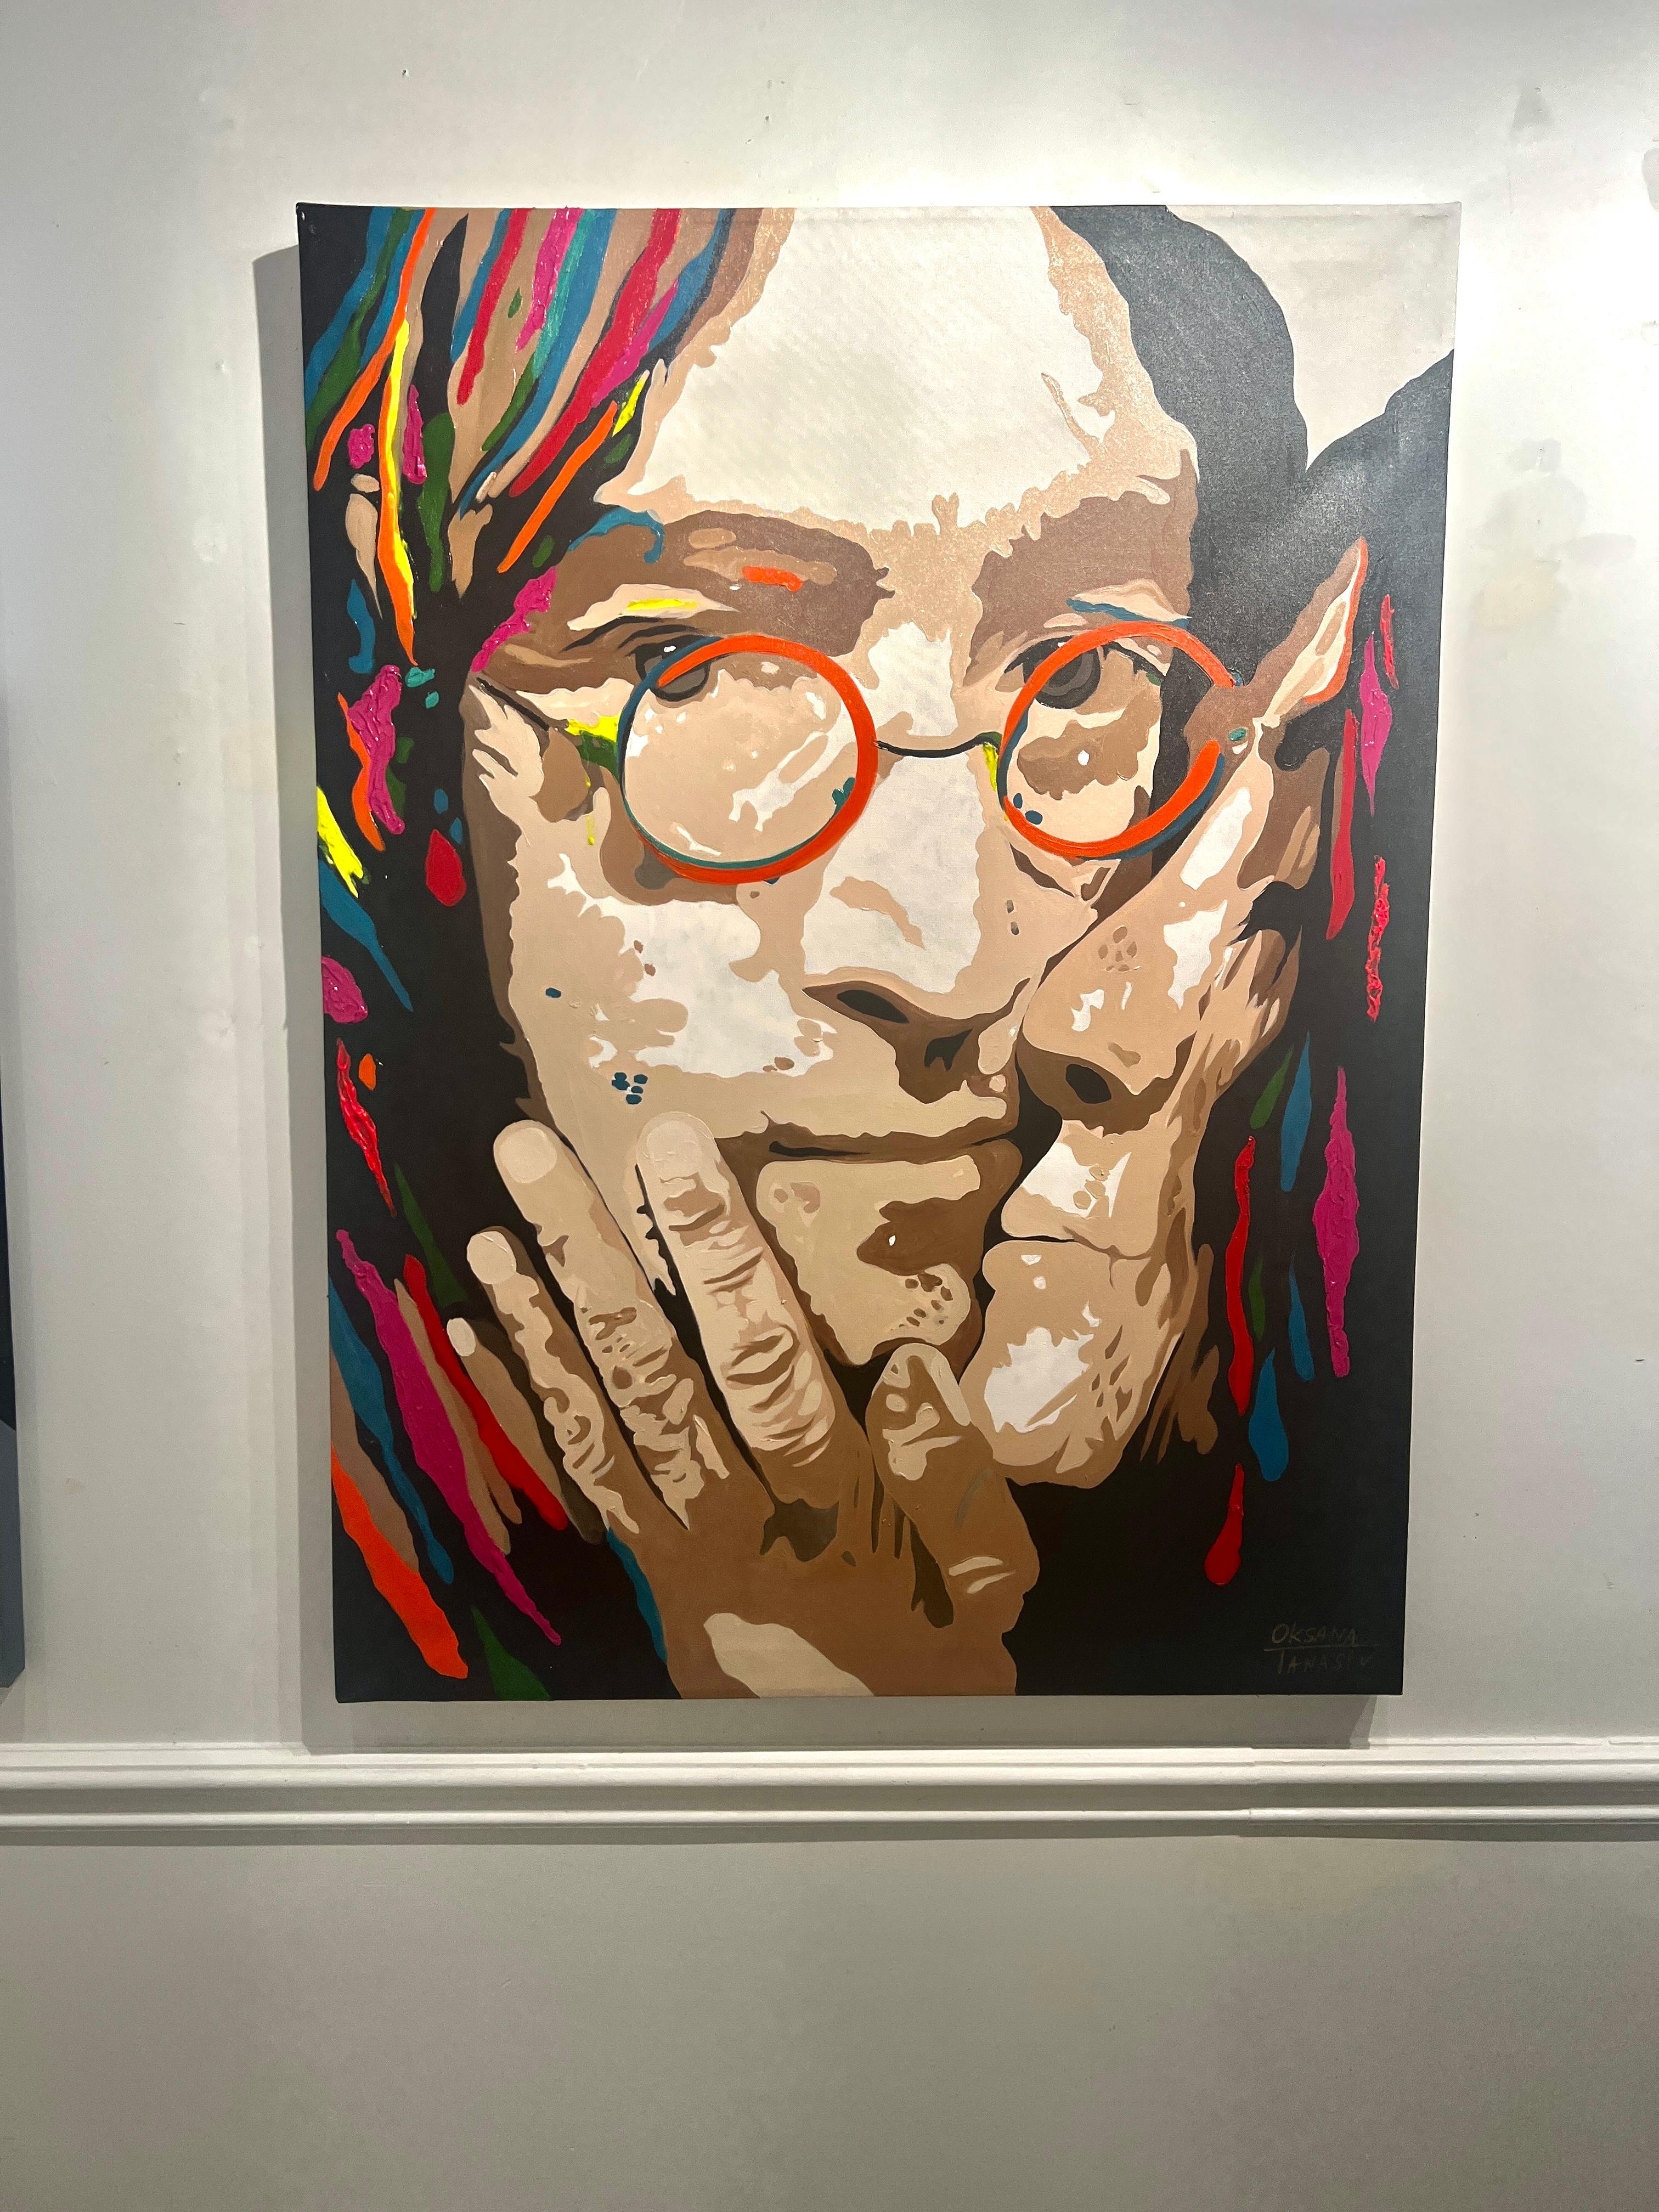 Portrait of John Lennon and Yoko Ono, powerful couple whose relationship is one of the most famously iconic.

In my creation, I explored the essence of iconography wrapped in bursts of color, evoking dynamism and depth with oil. Embracing the